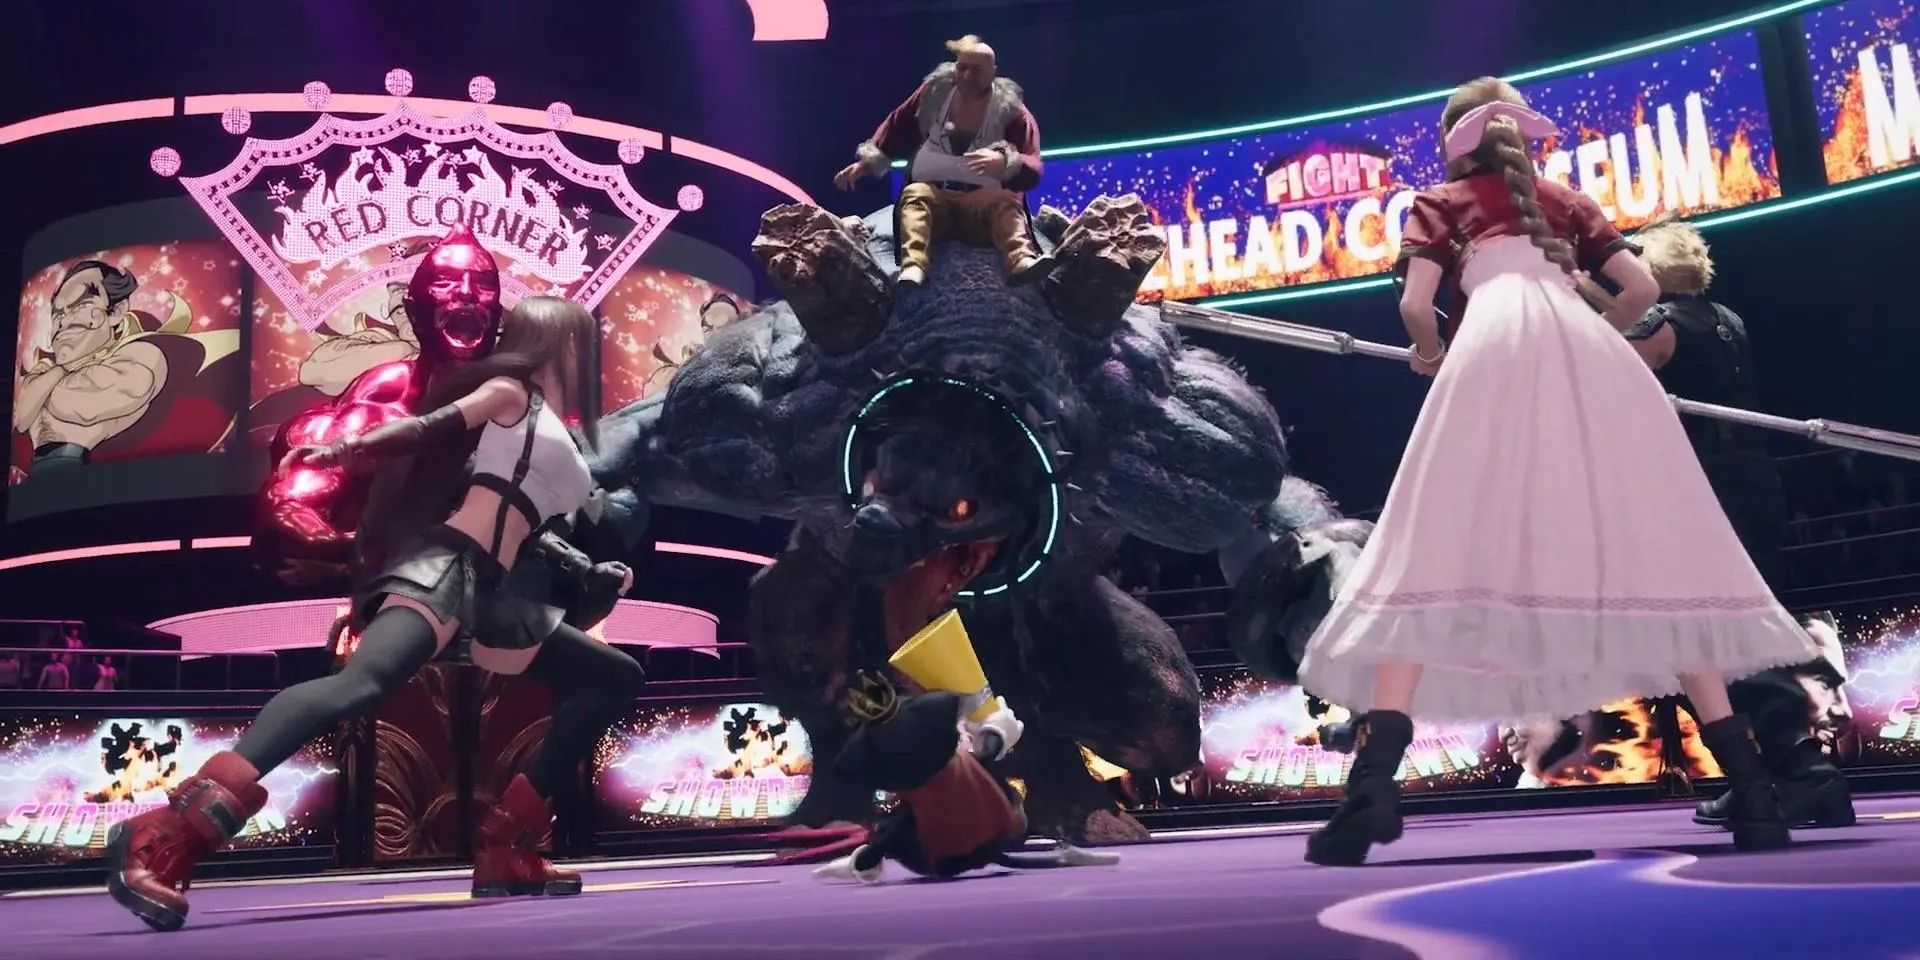 FF7 Rebirth - Tifa, Cait Sith, and Aerith battle against Don Corneo, who sits on a monster's back.